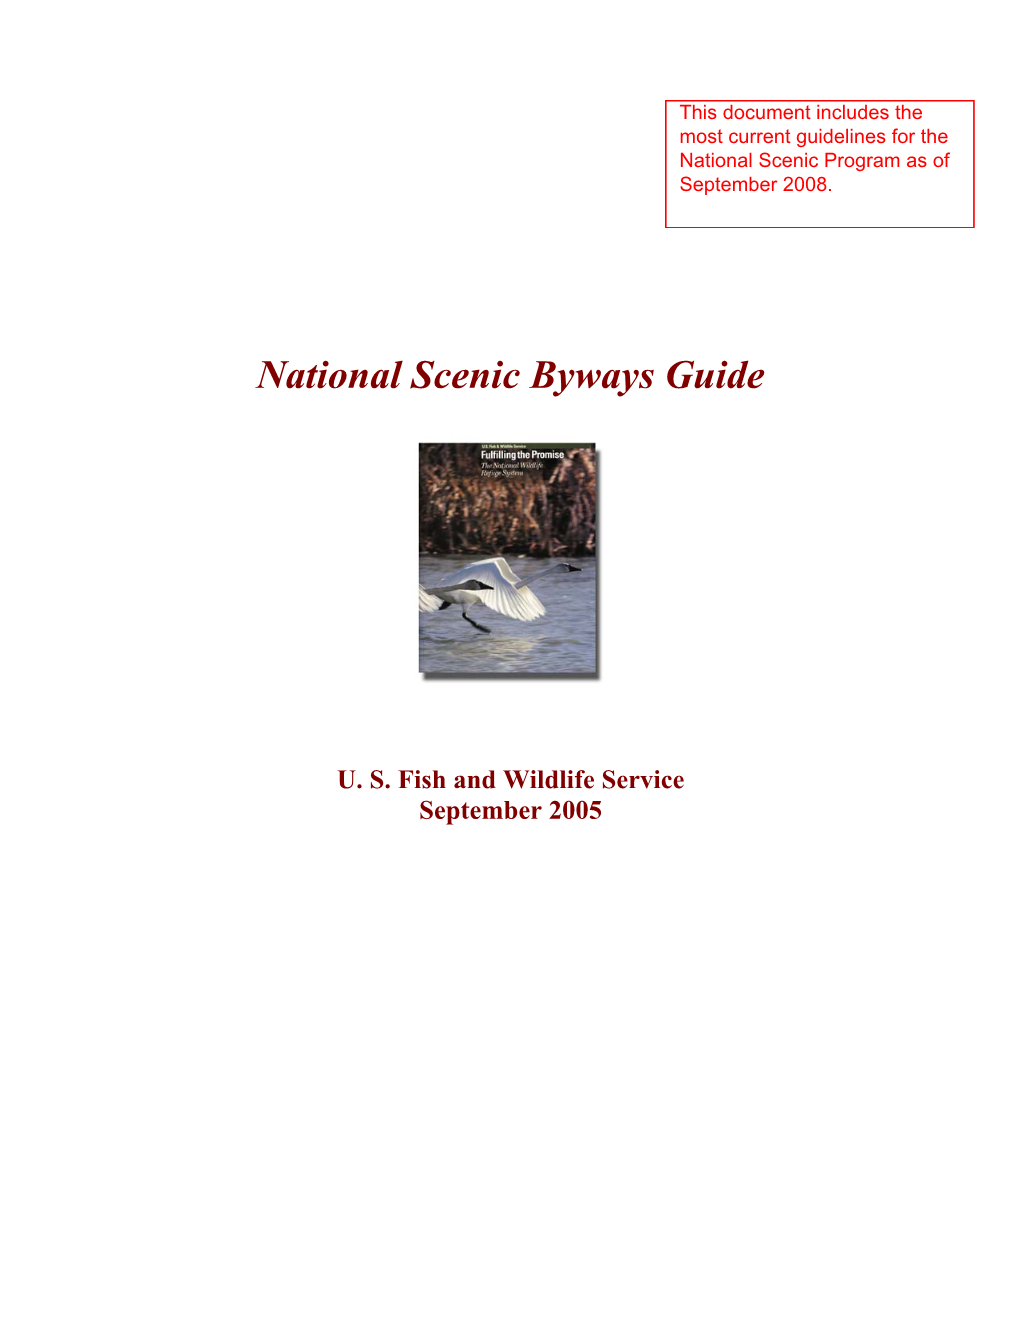 National Scenic Byways Guide